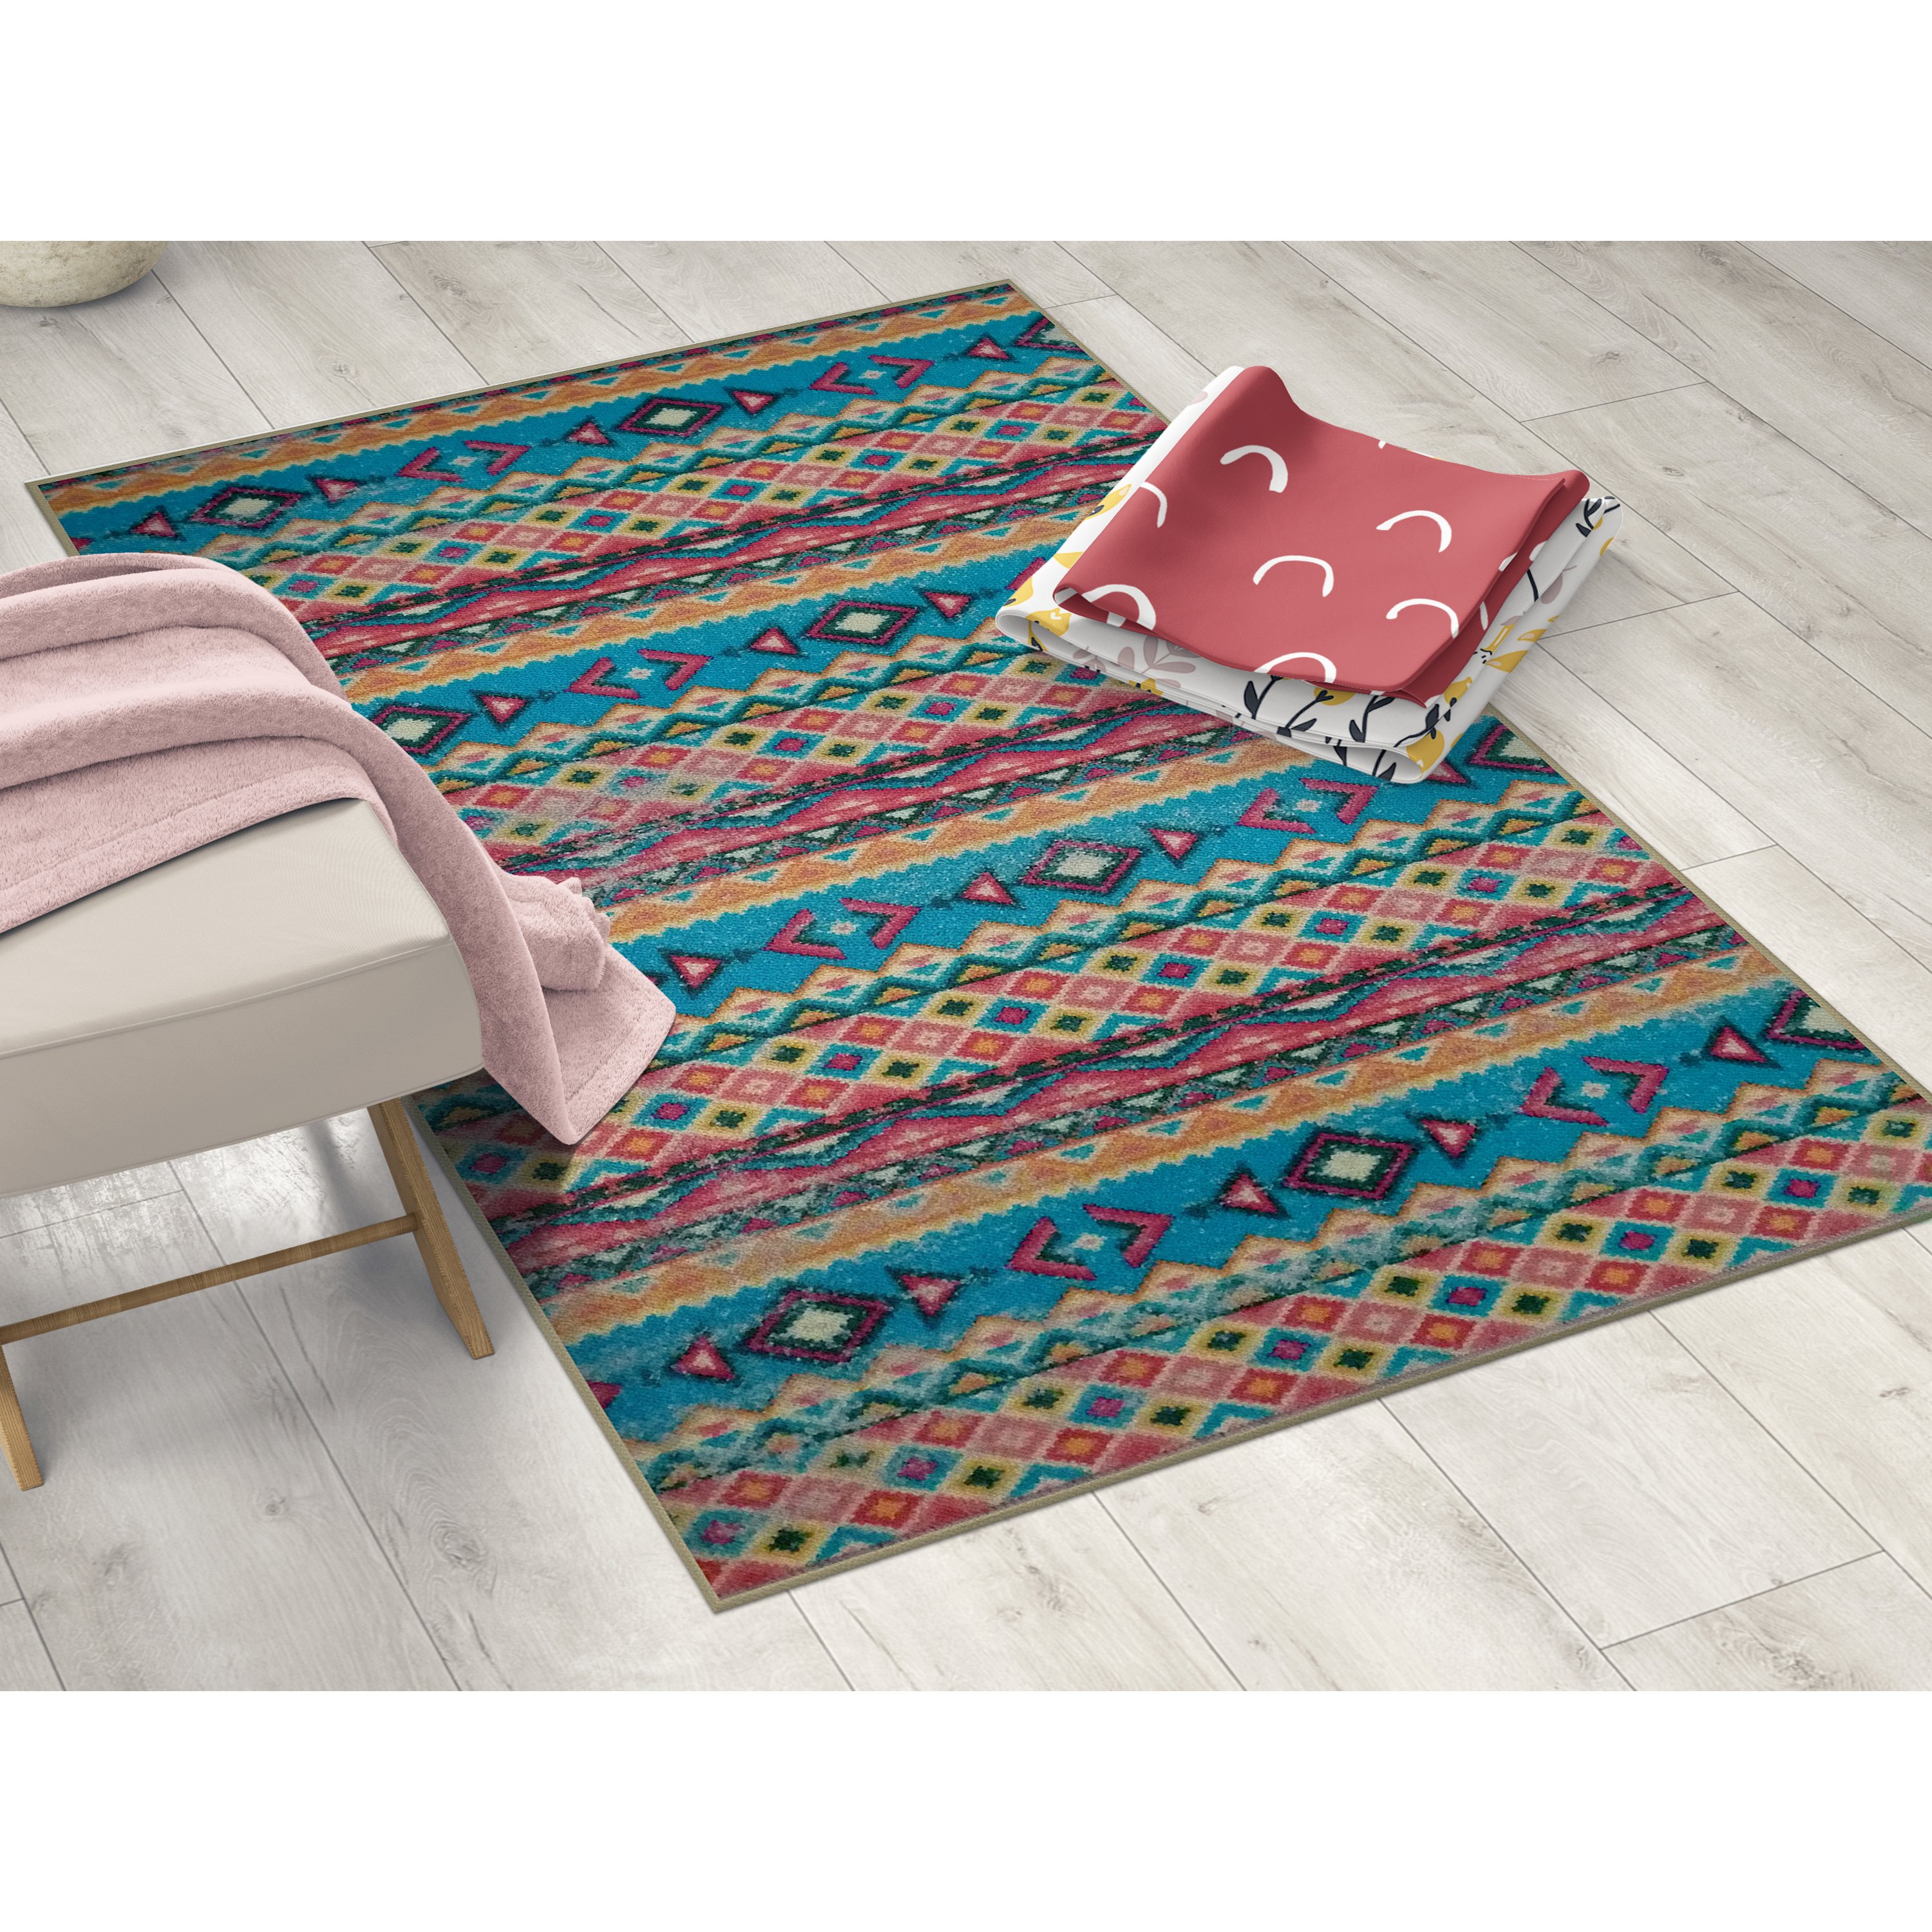 Deerlux Boho Living Room Area Rug With Nonslip Backing, Turquoise Aztec Pattern - 8 X 10